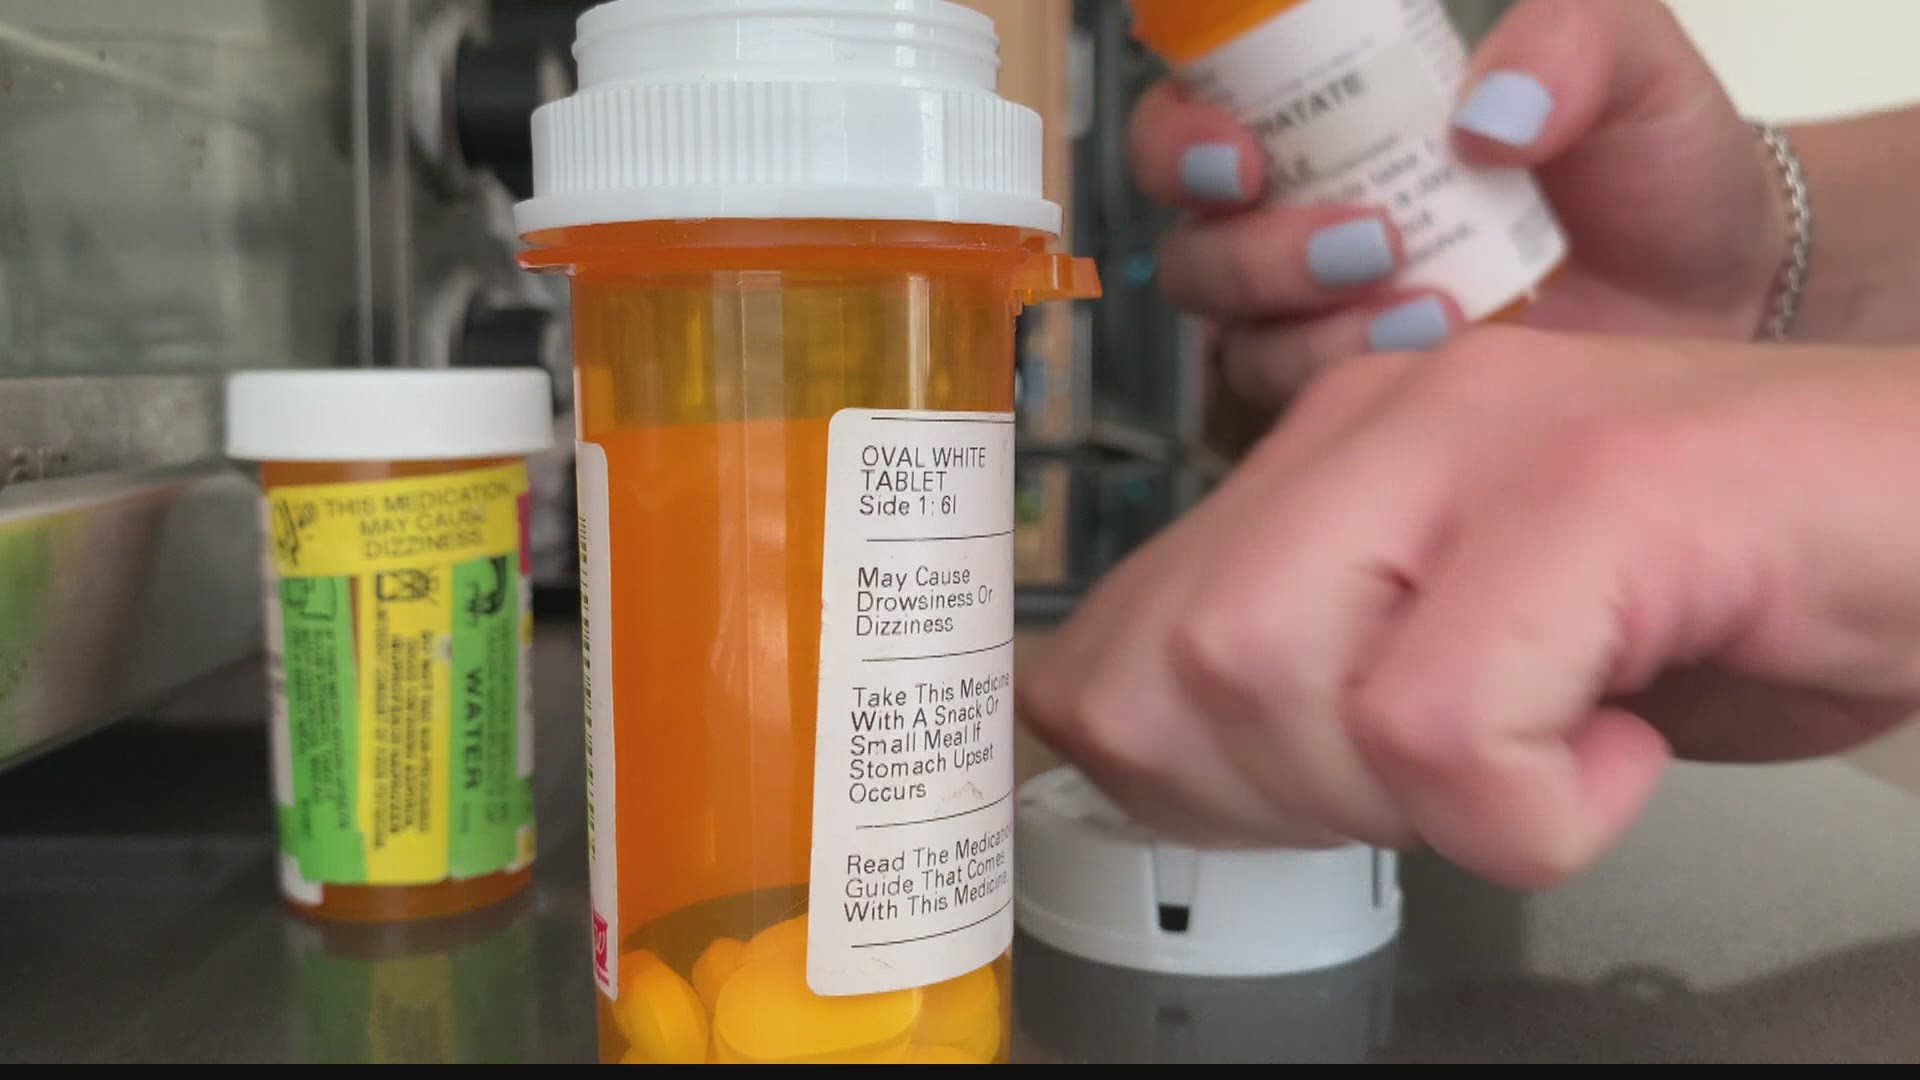 An AARP study shows the cost of prescription drugs is rising at more than double the general inflation rate.